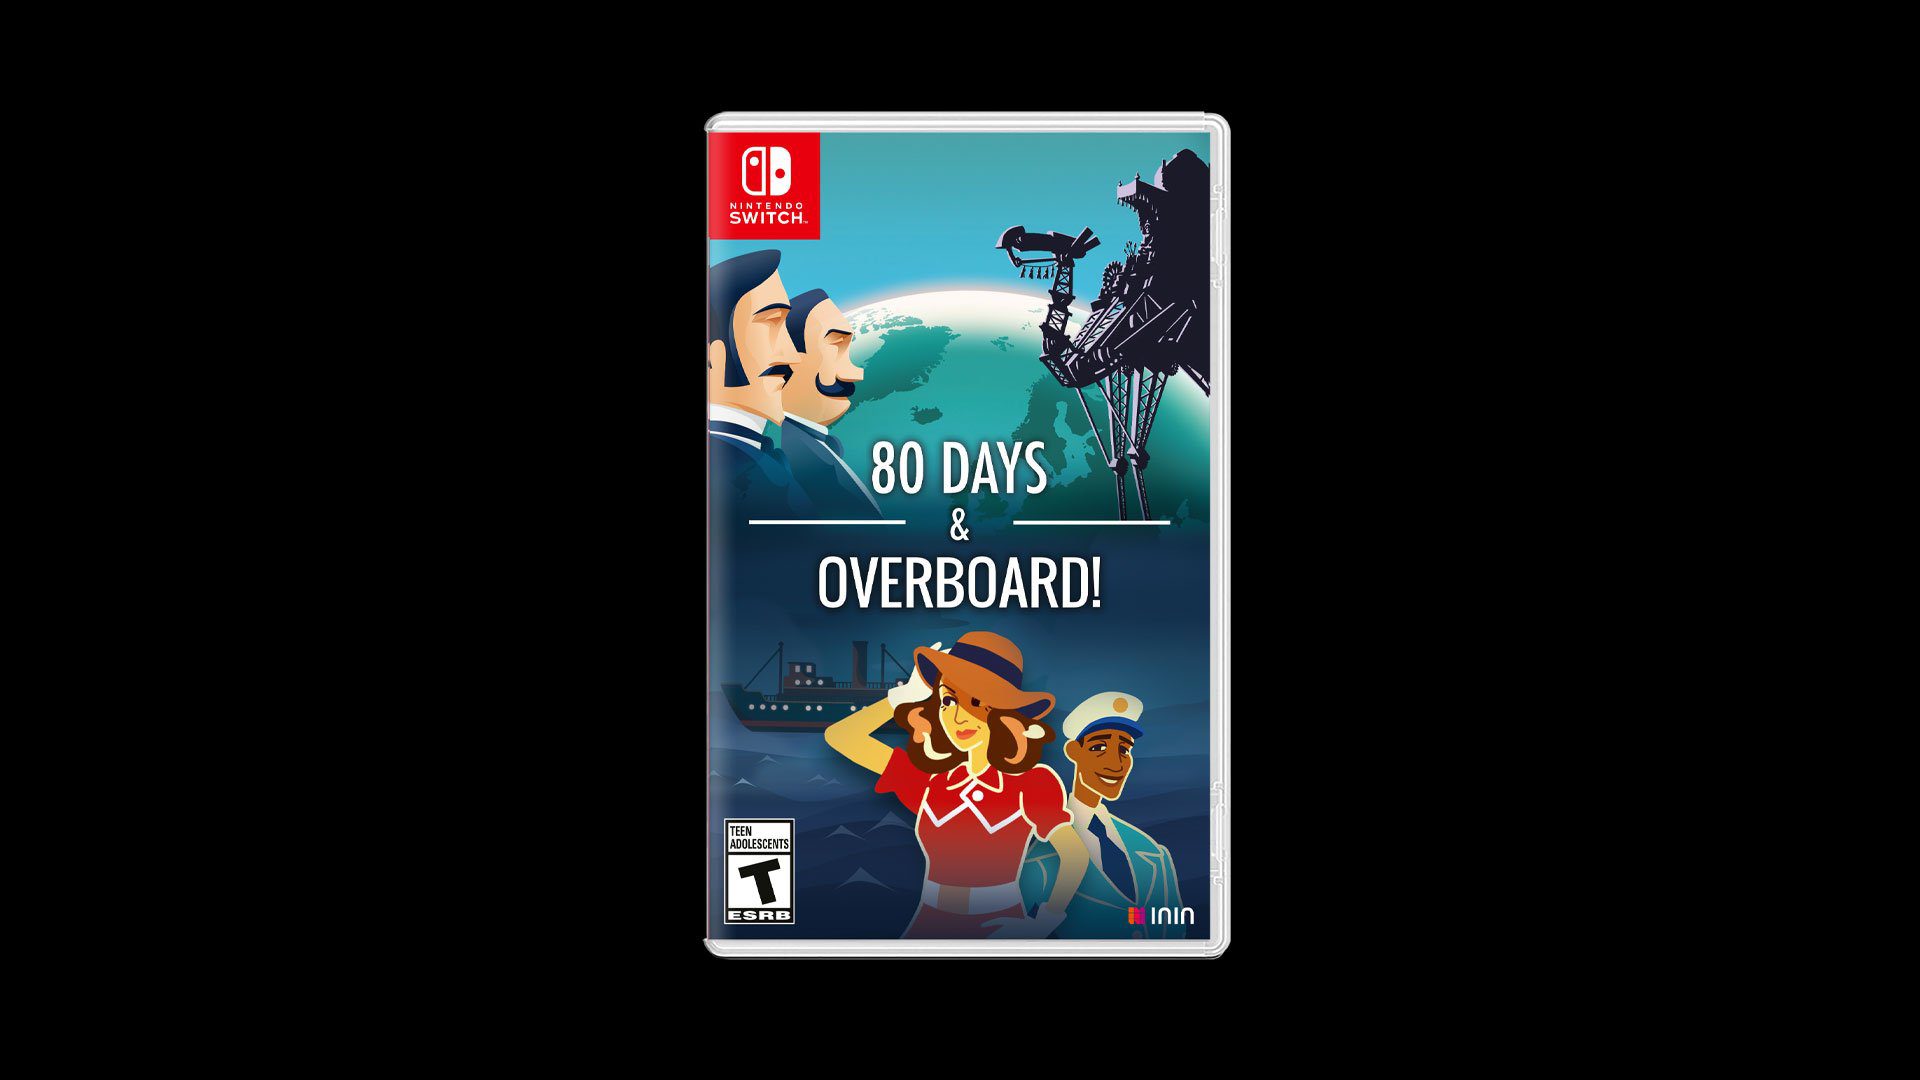 80 Days & Overboard Nintendo Switch boxed editions out now